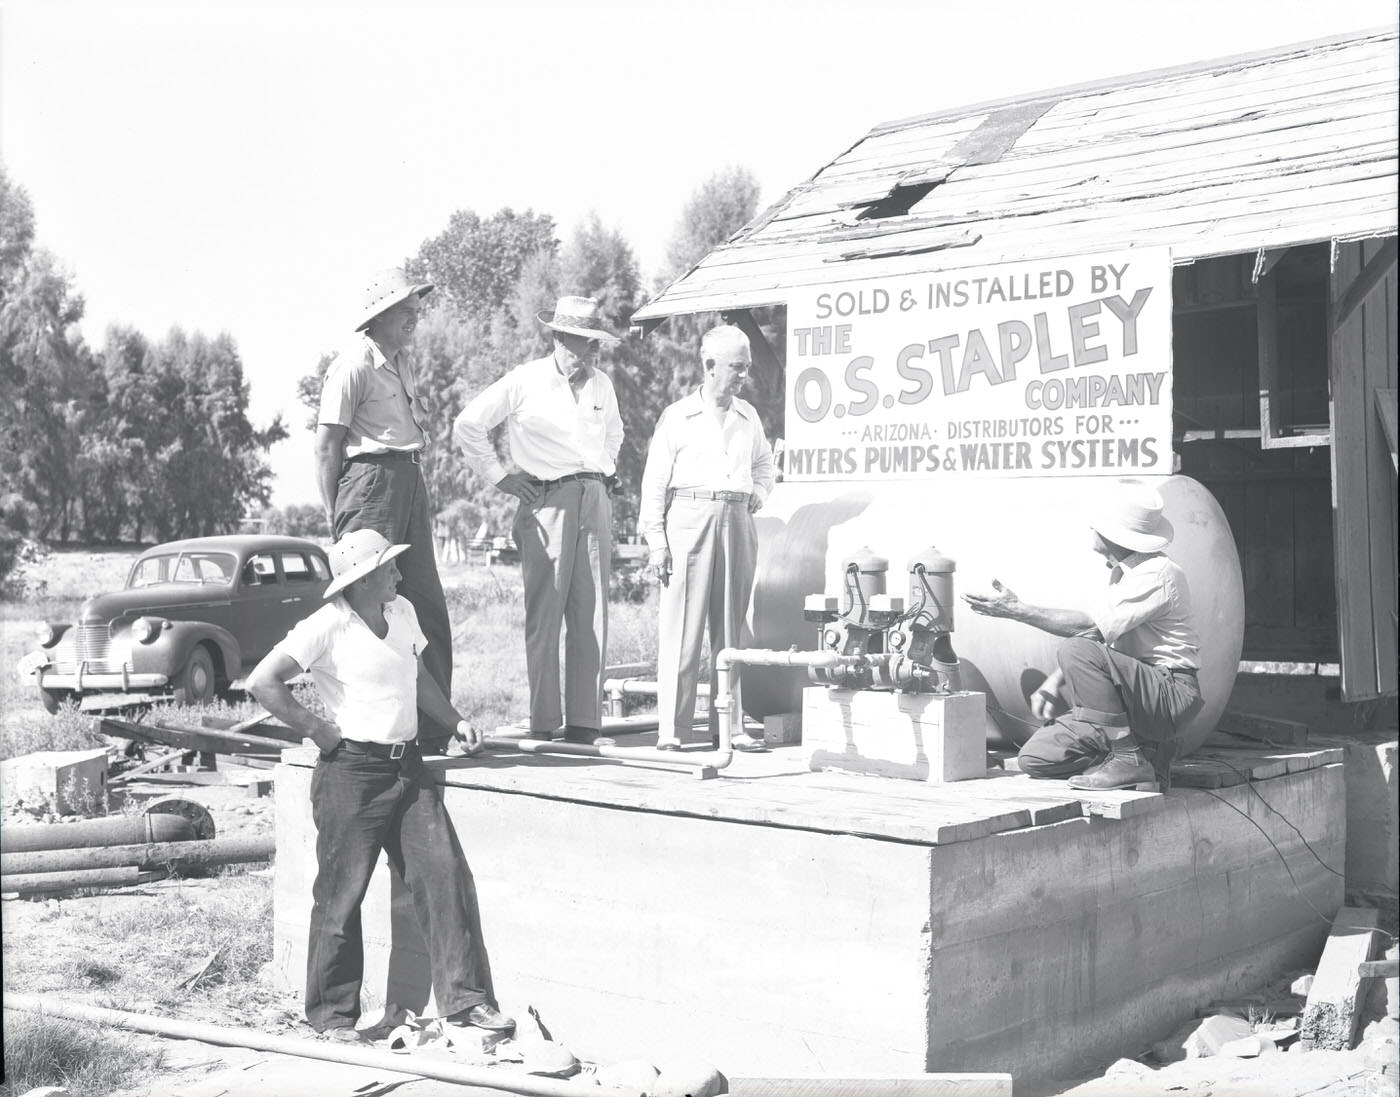 Pump Sold and Installed by the O. S. Stapley Co., 1944